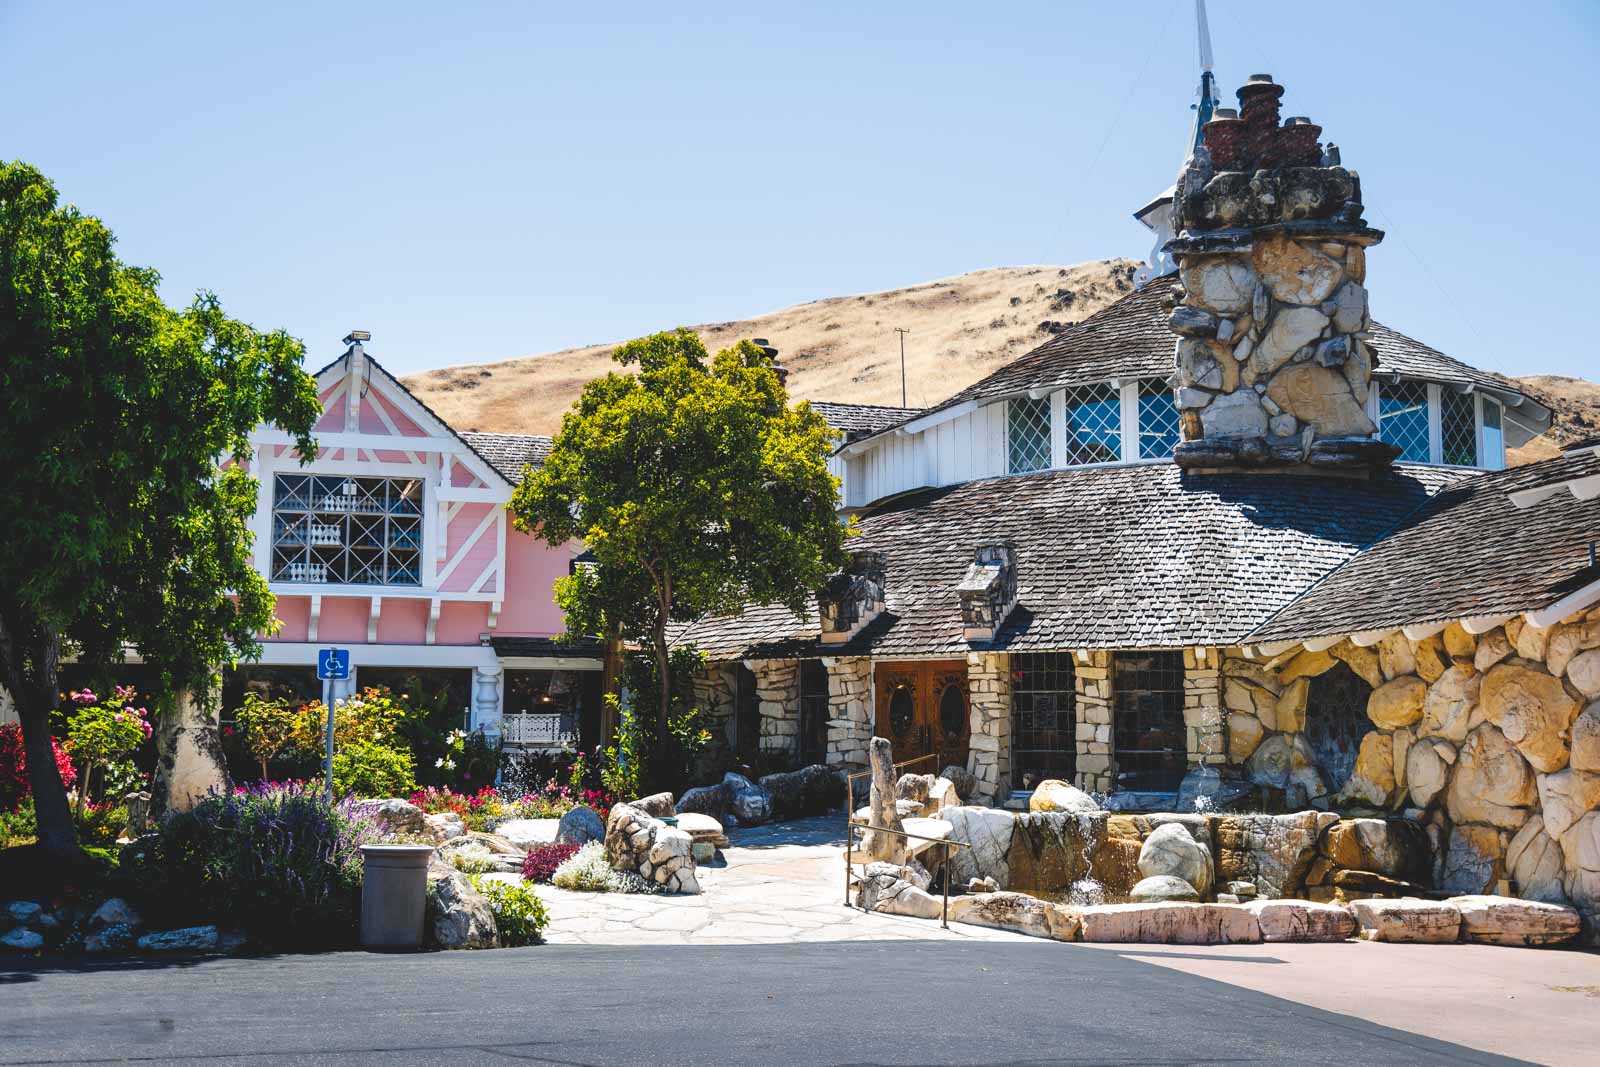 Unique looking Madonna Inn accommodation with stone walls and a hill behind it in San Luis Obispo.